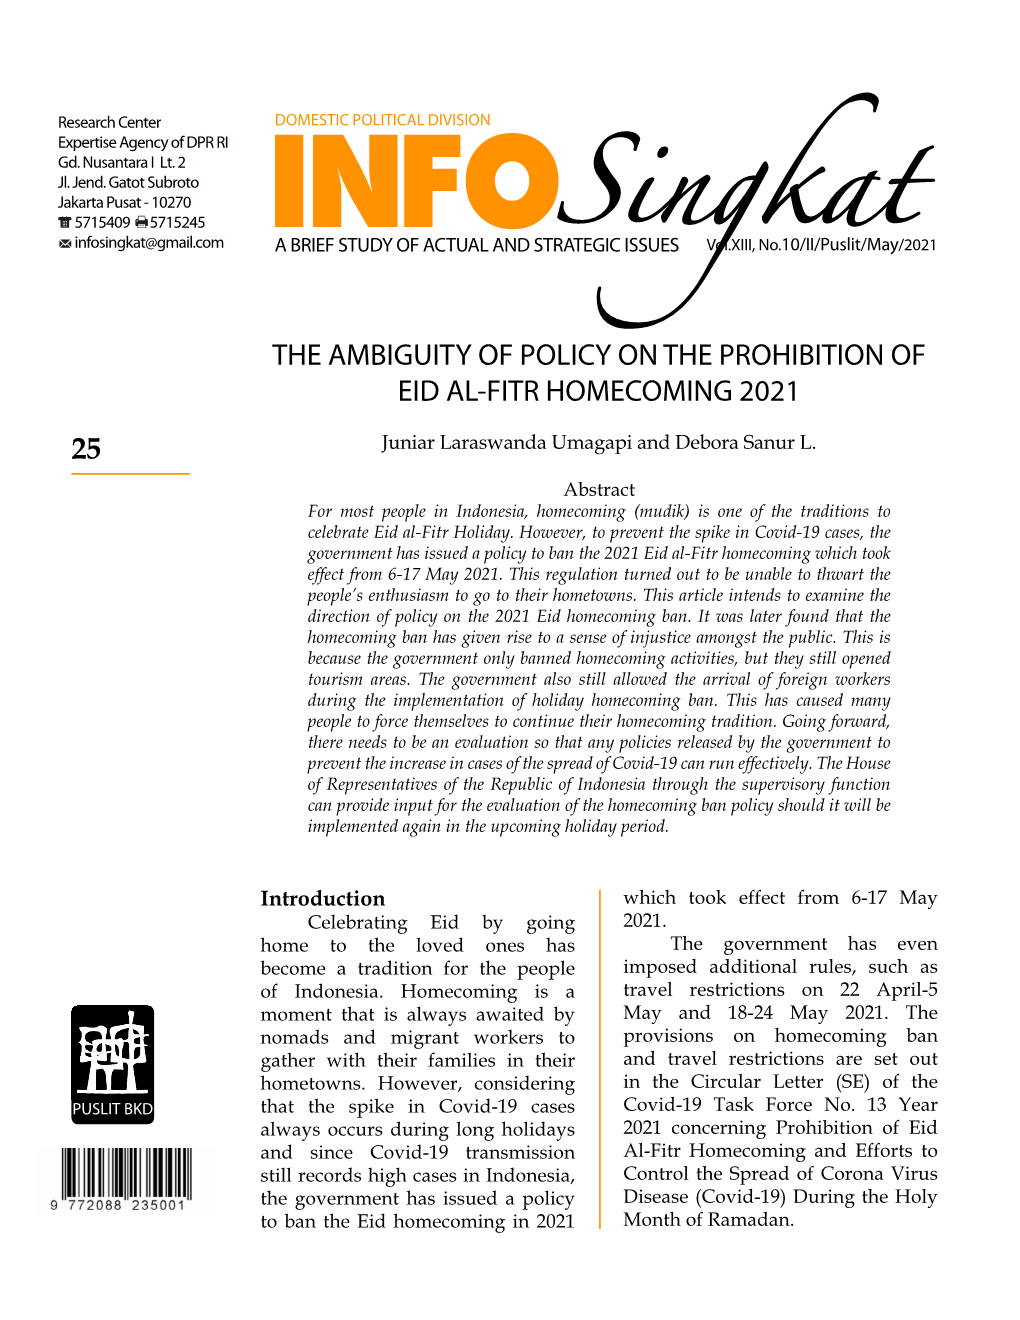 The Ambiguity of Policy on the Prohibition of Eid Al-Fitr Homecoming 2021